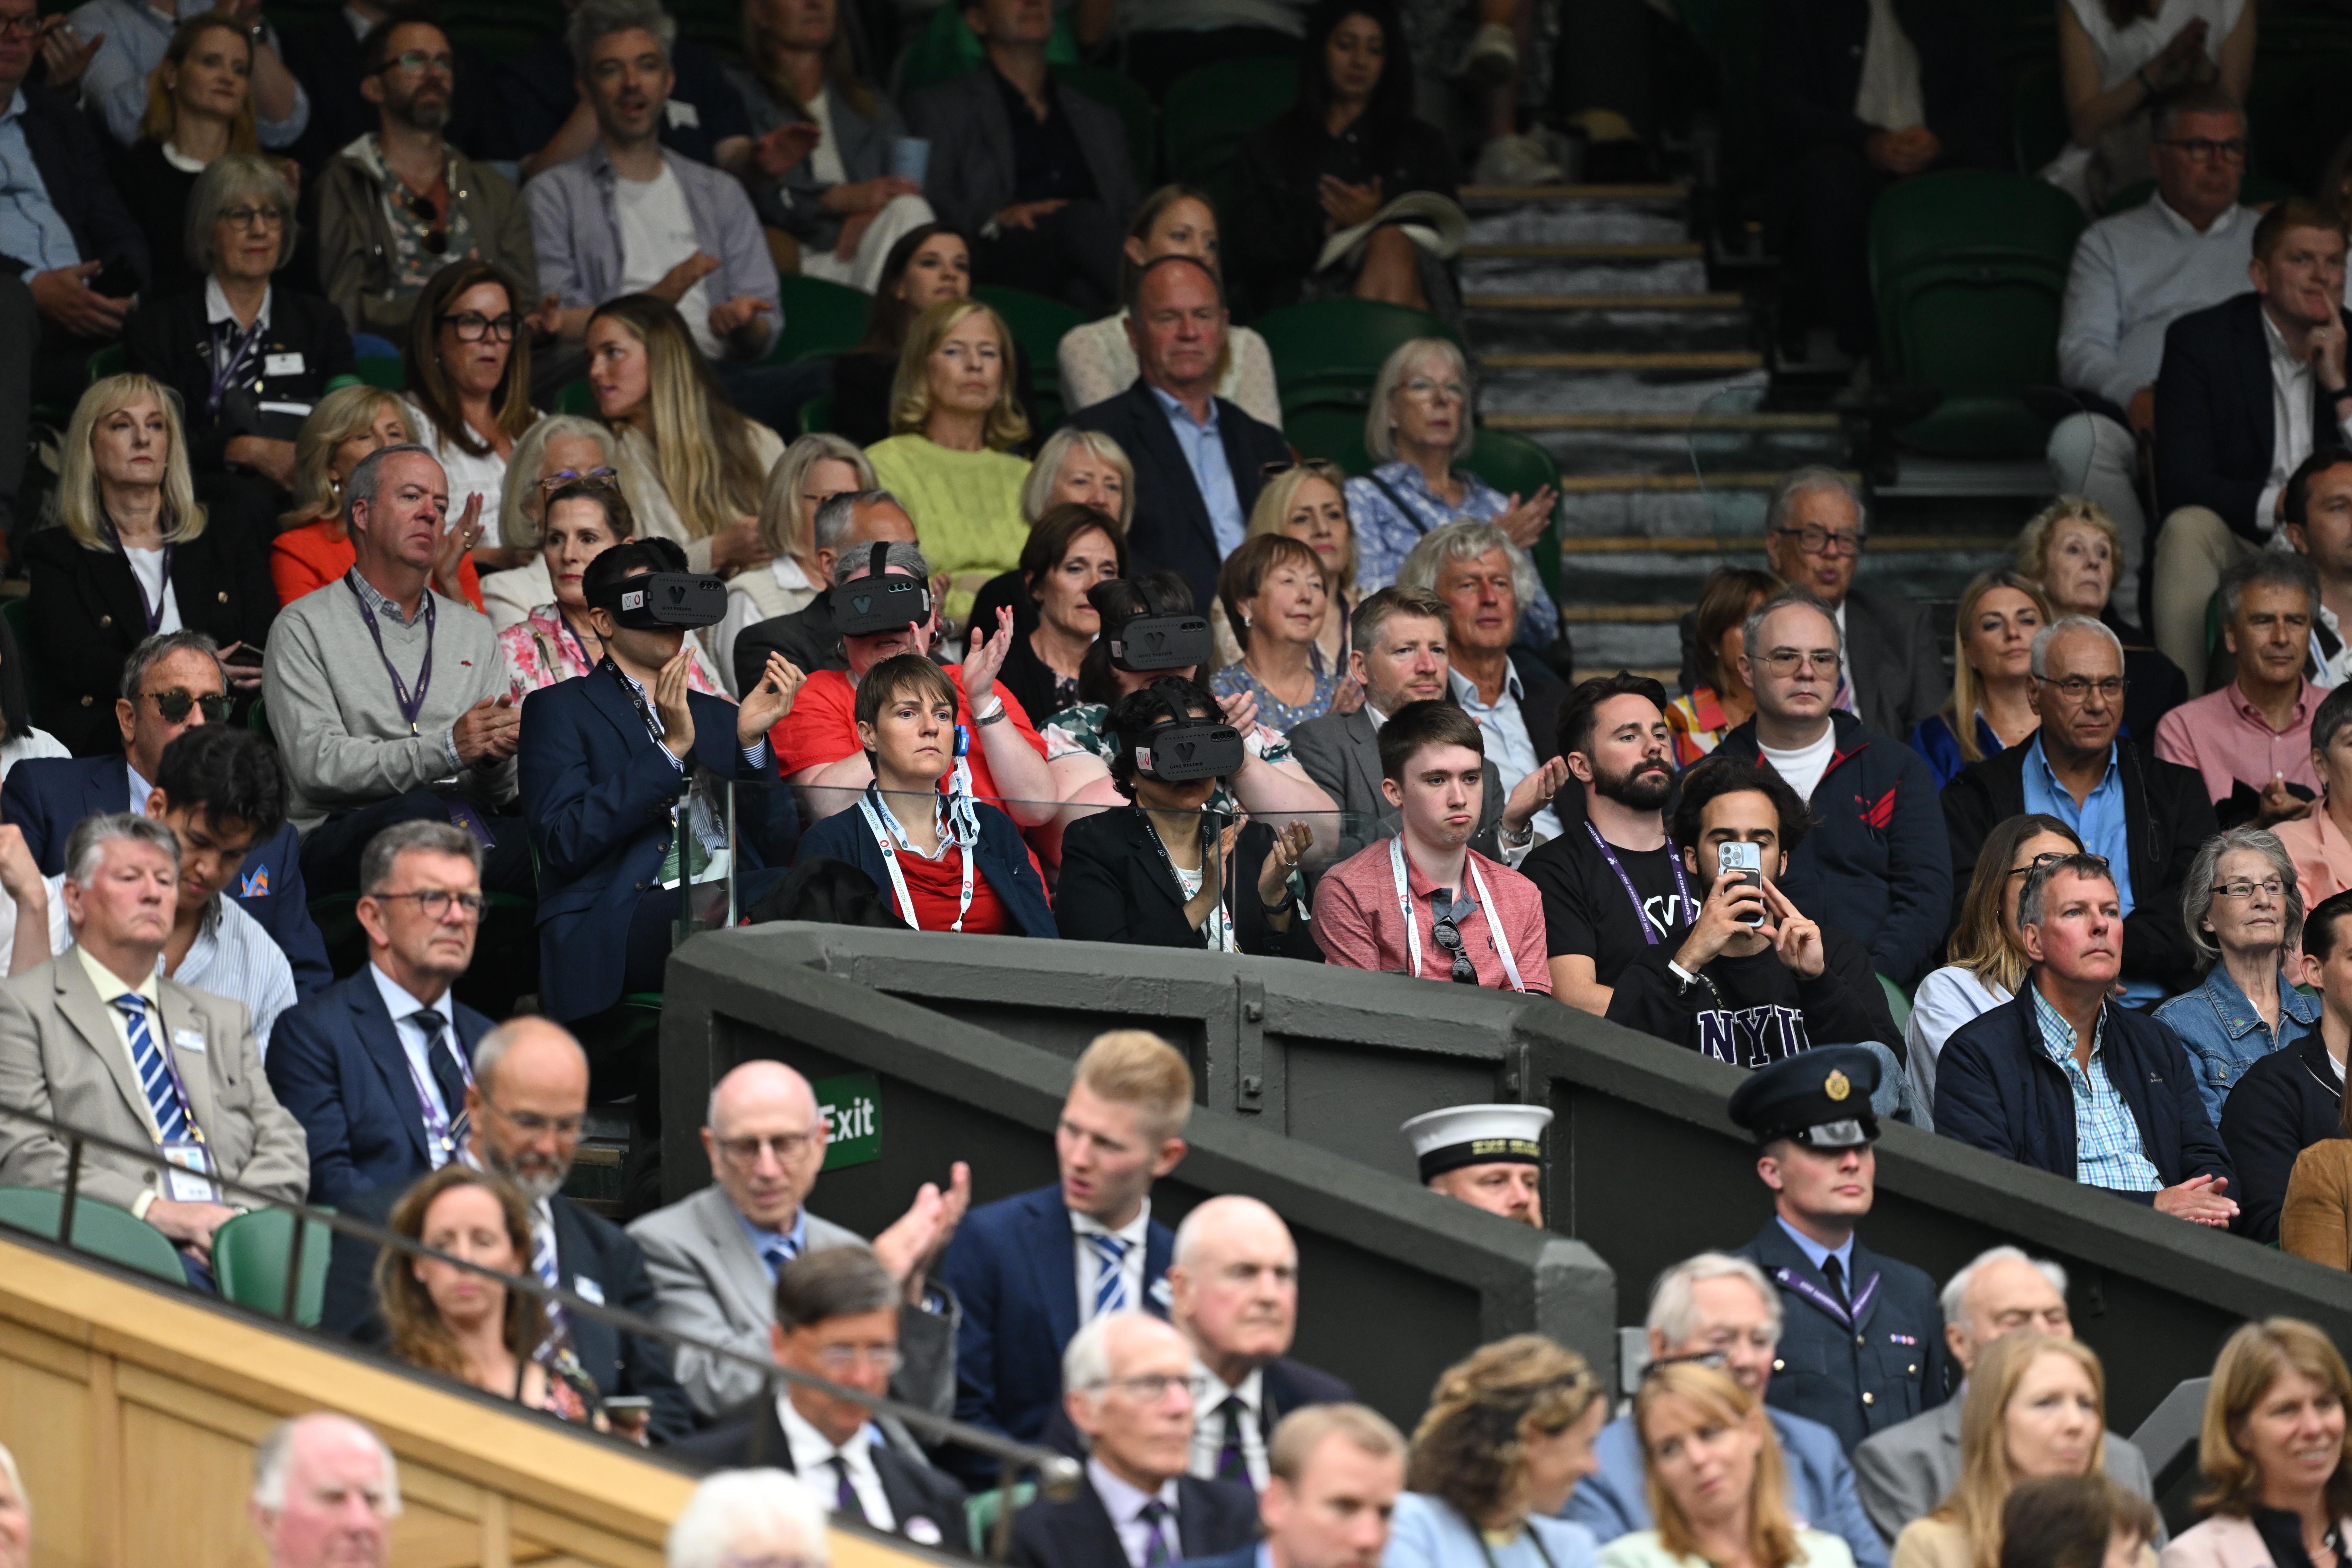 The GiveVision trialists in the stands at Wimbledon